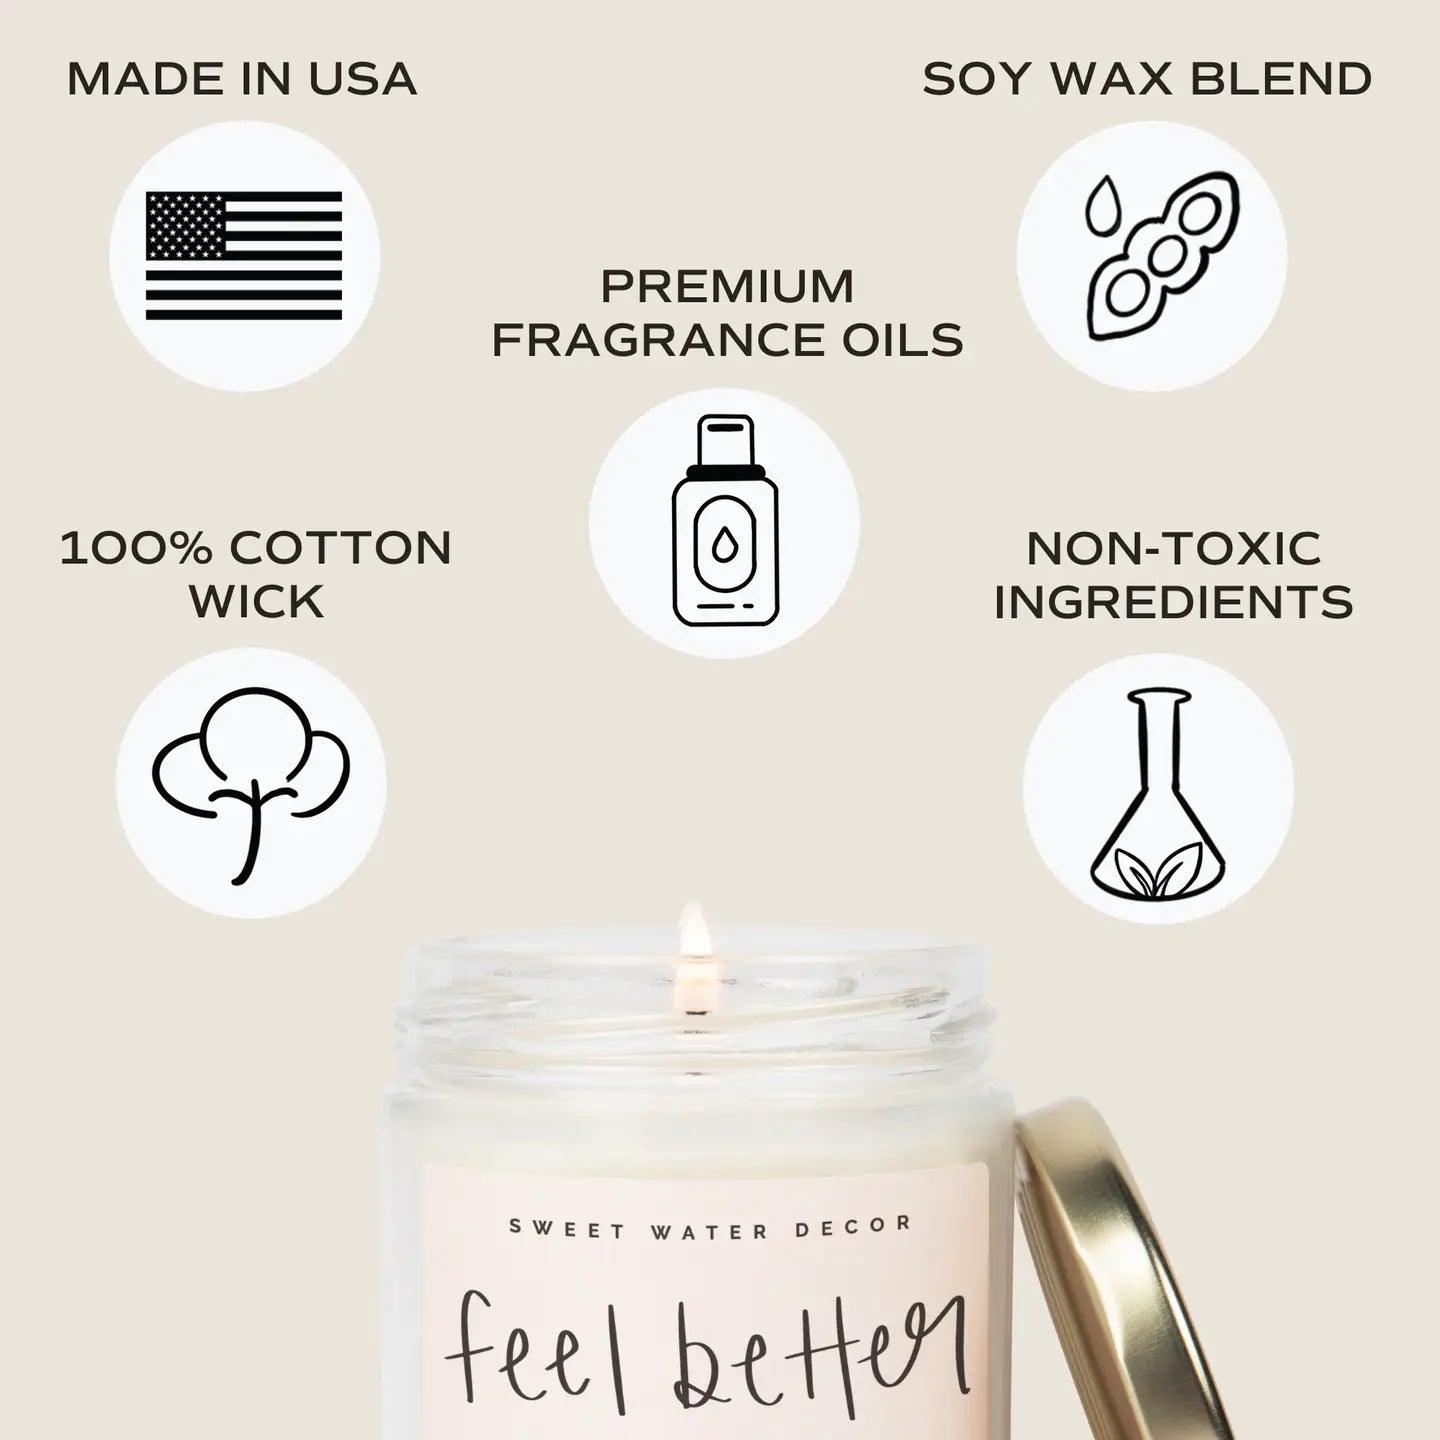 Feel Better Soon 9 oz Soy Candle - Home Decor & Gifts